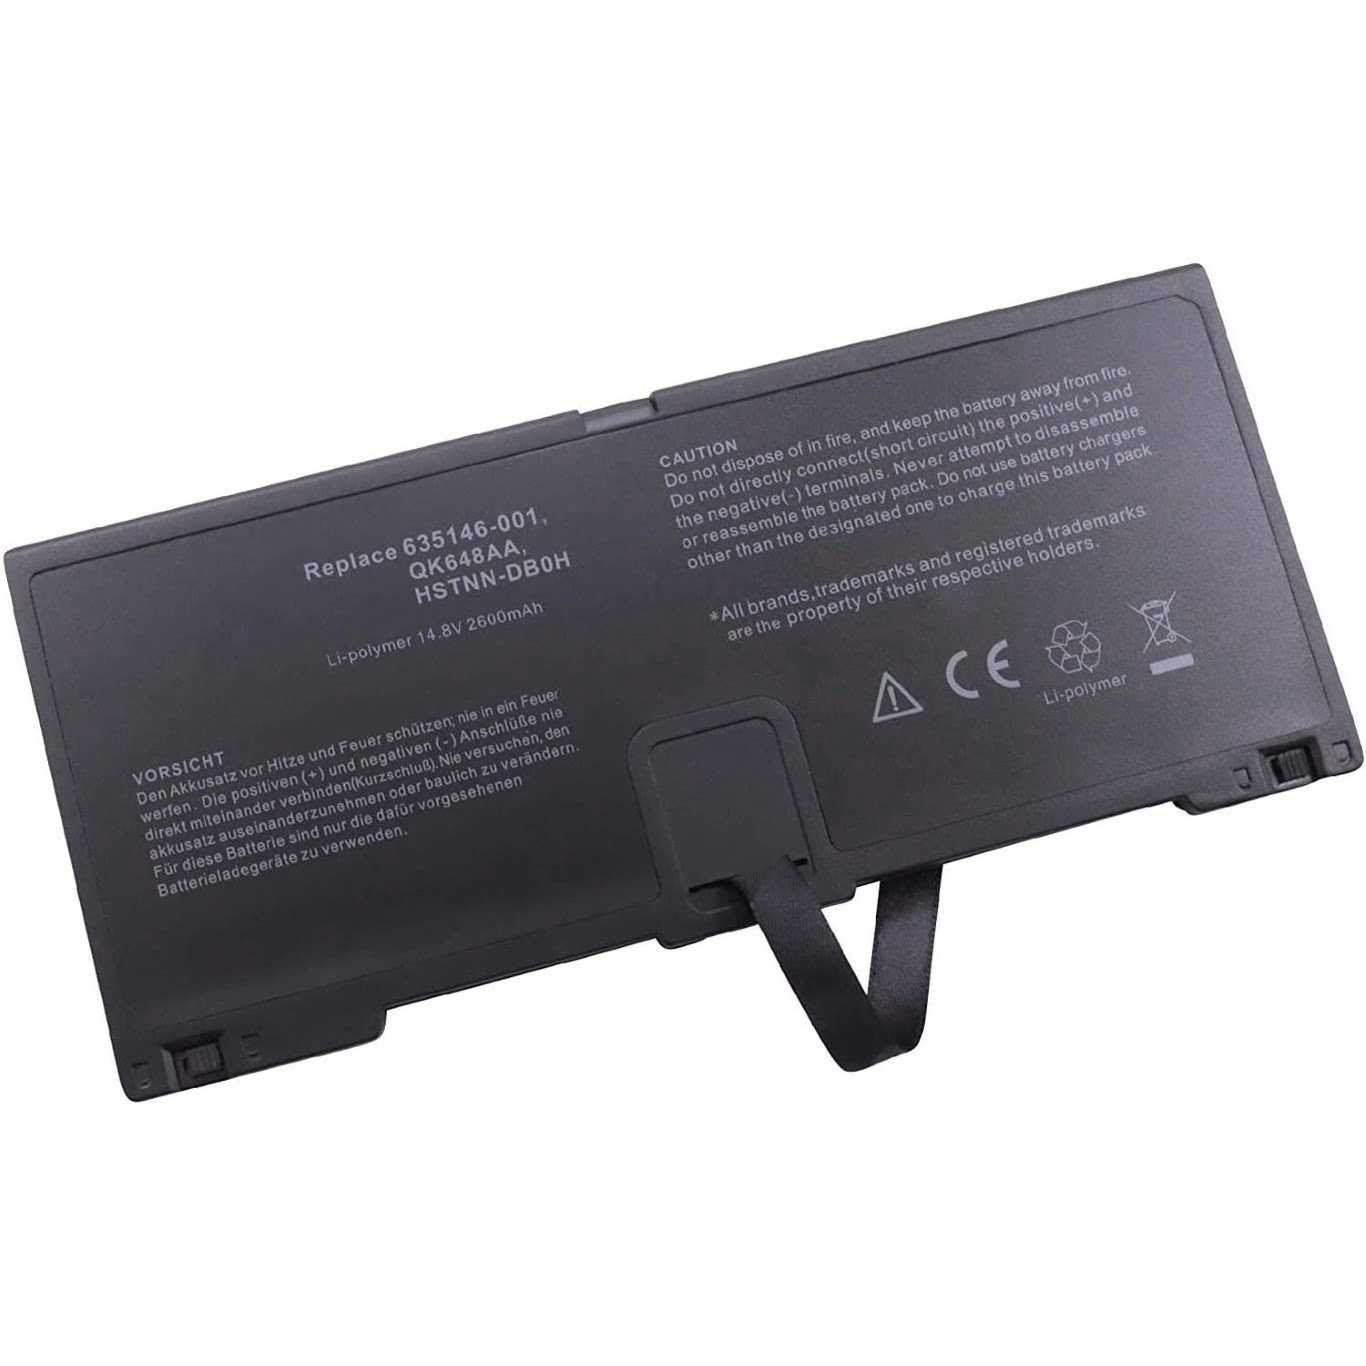 Hp 635146-001, Fn04 Laptop Battery For Probook 5330m replacement